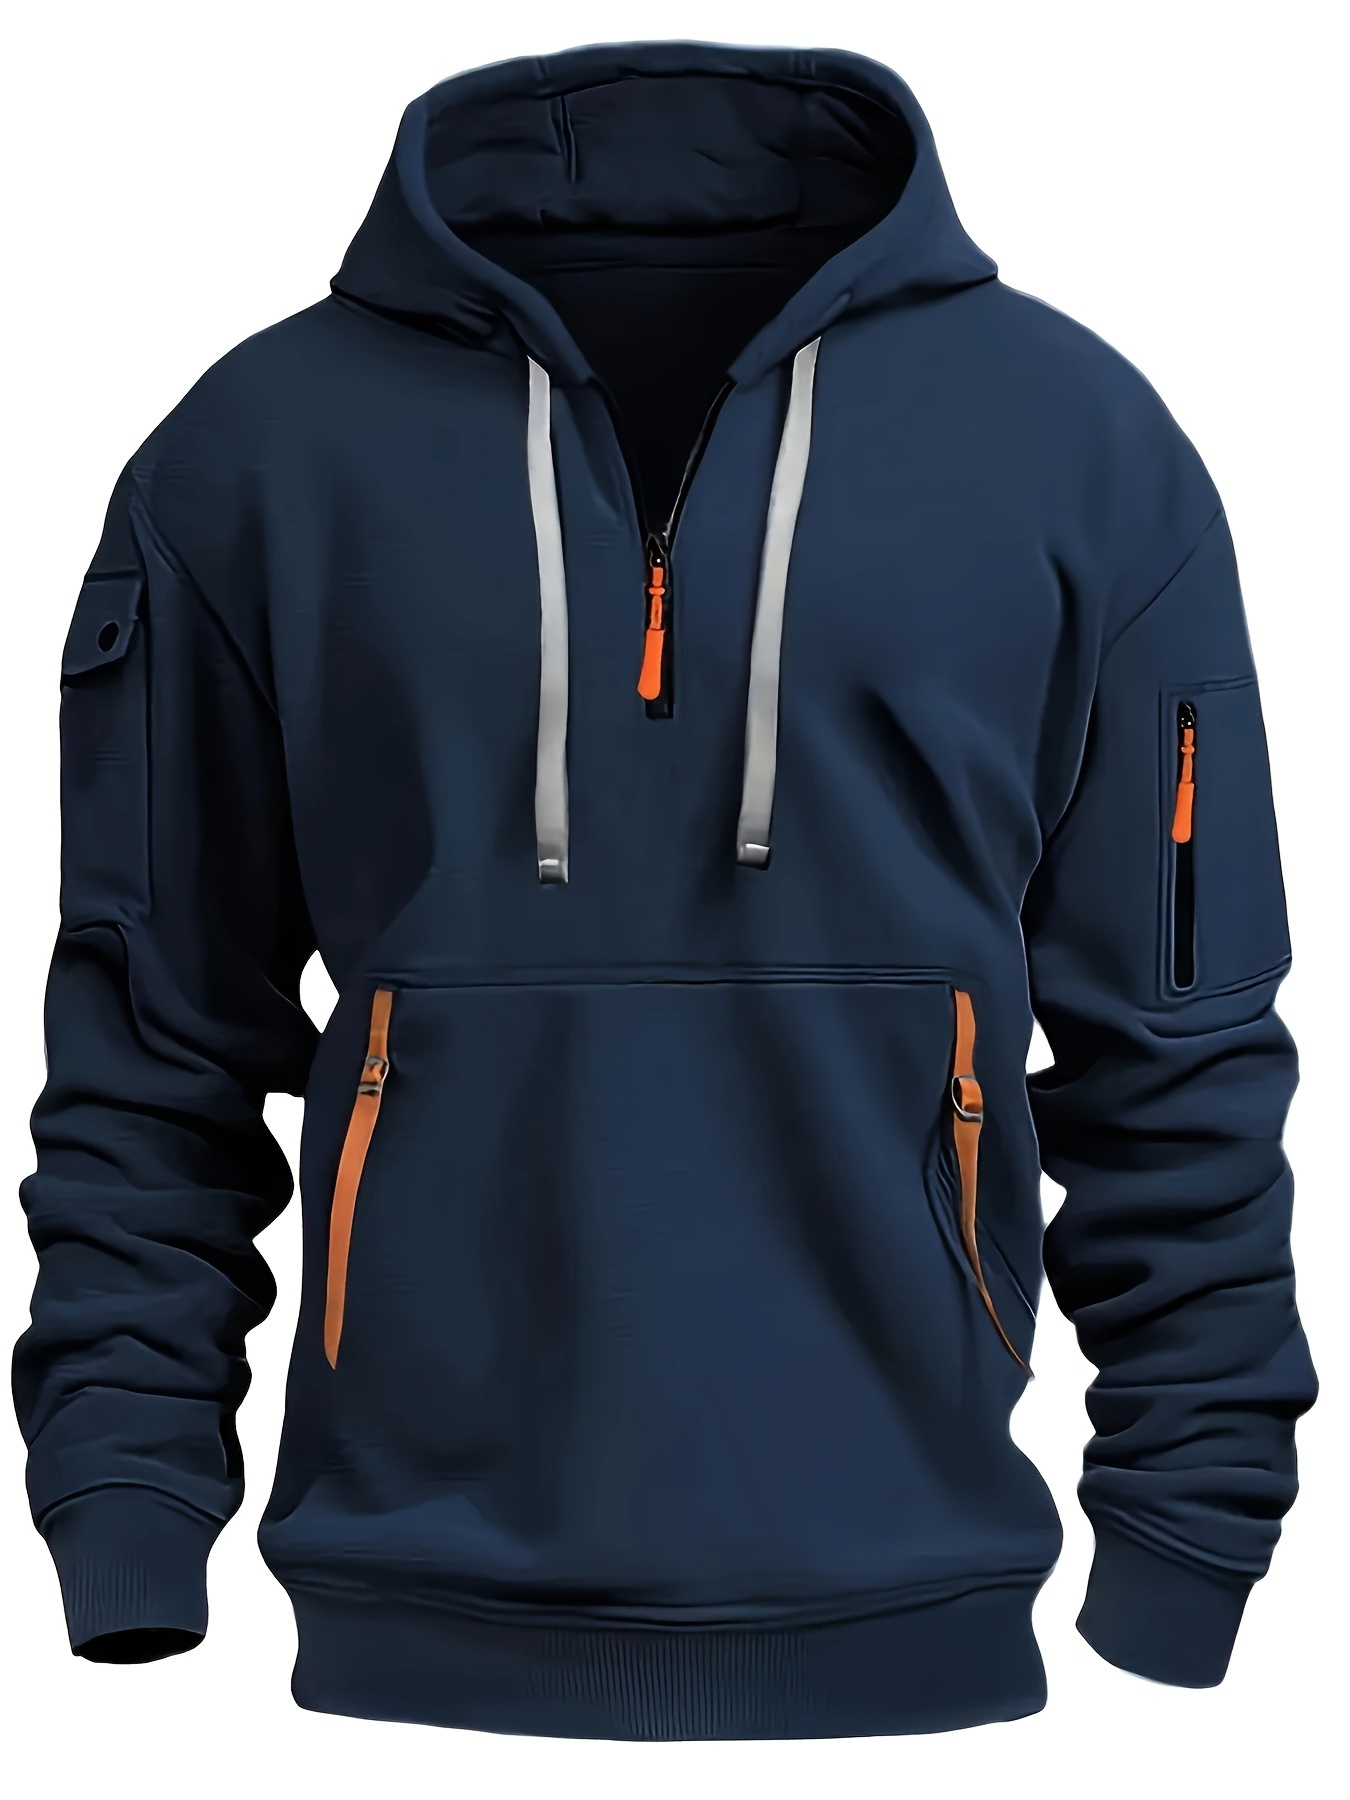 Men’s Fashion Half Zipped Sports Hoodie With Pockets, Casual Athletic Pullover, Comfortable Fit Sweatshirt With Hood